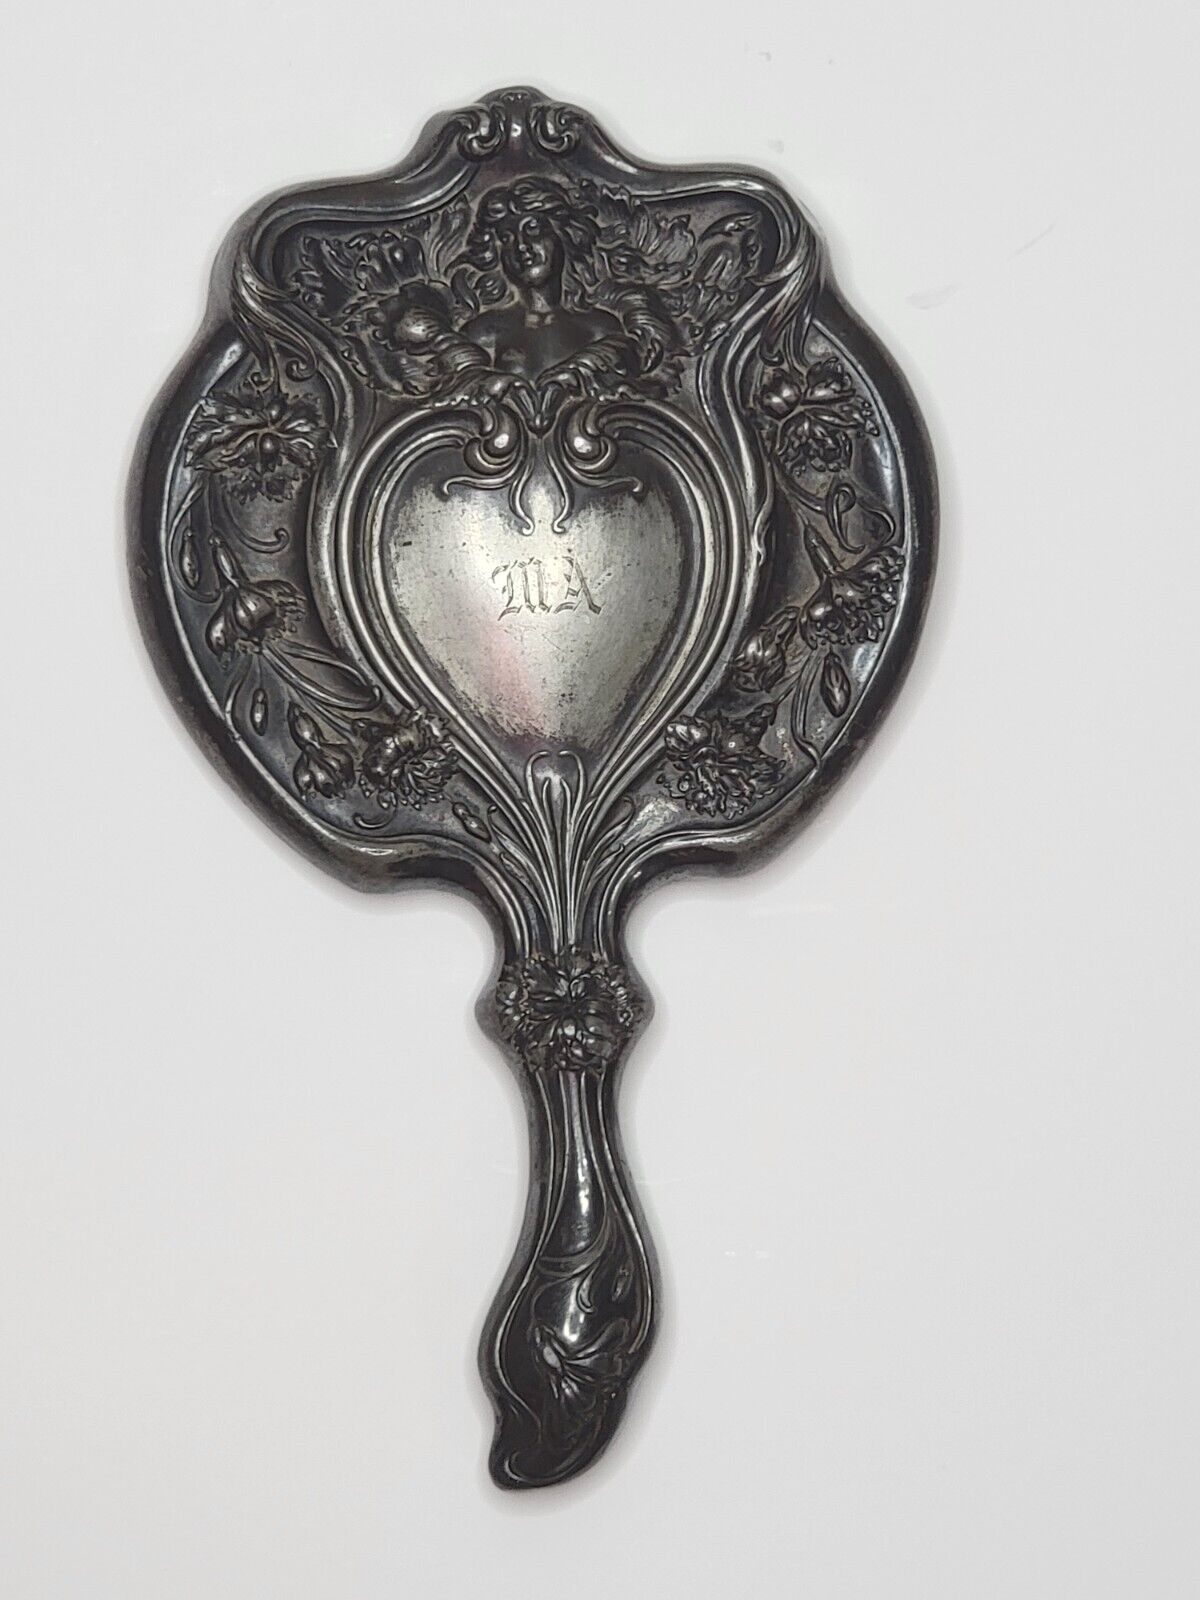 Antique Art Nouveau Silver Plated Hand Mirror Lovely Lady & Flowers